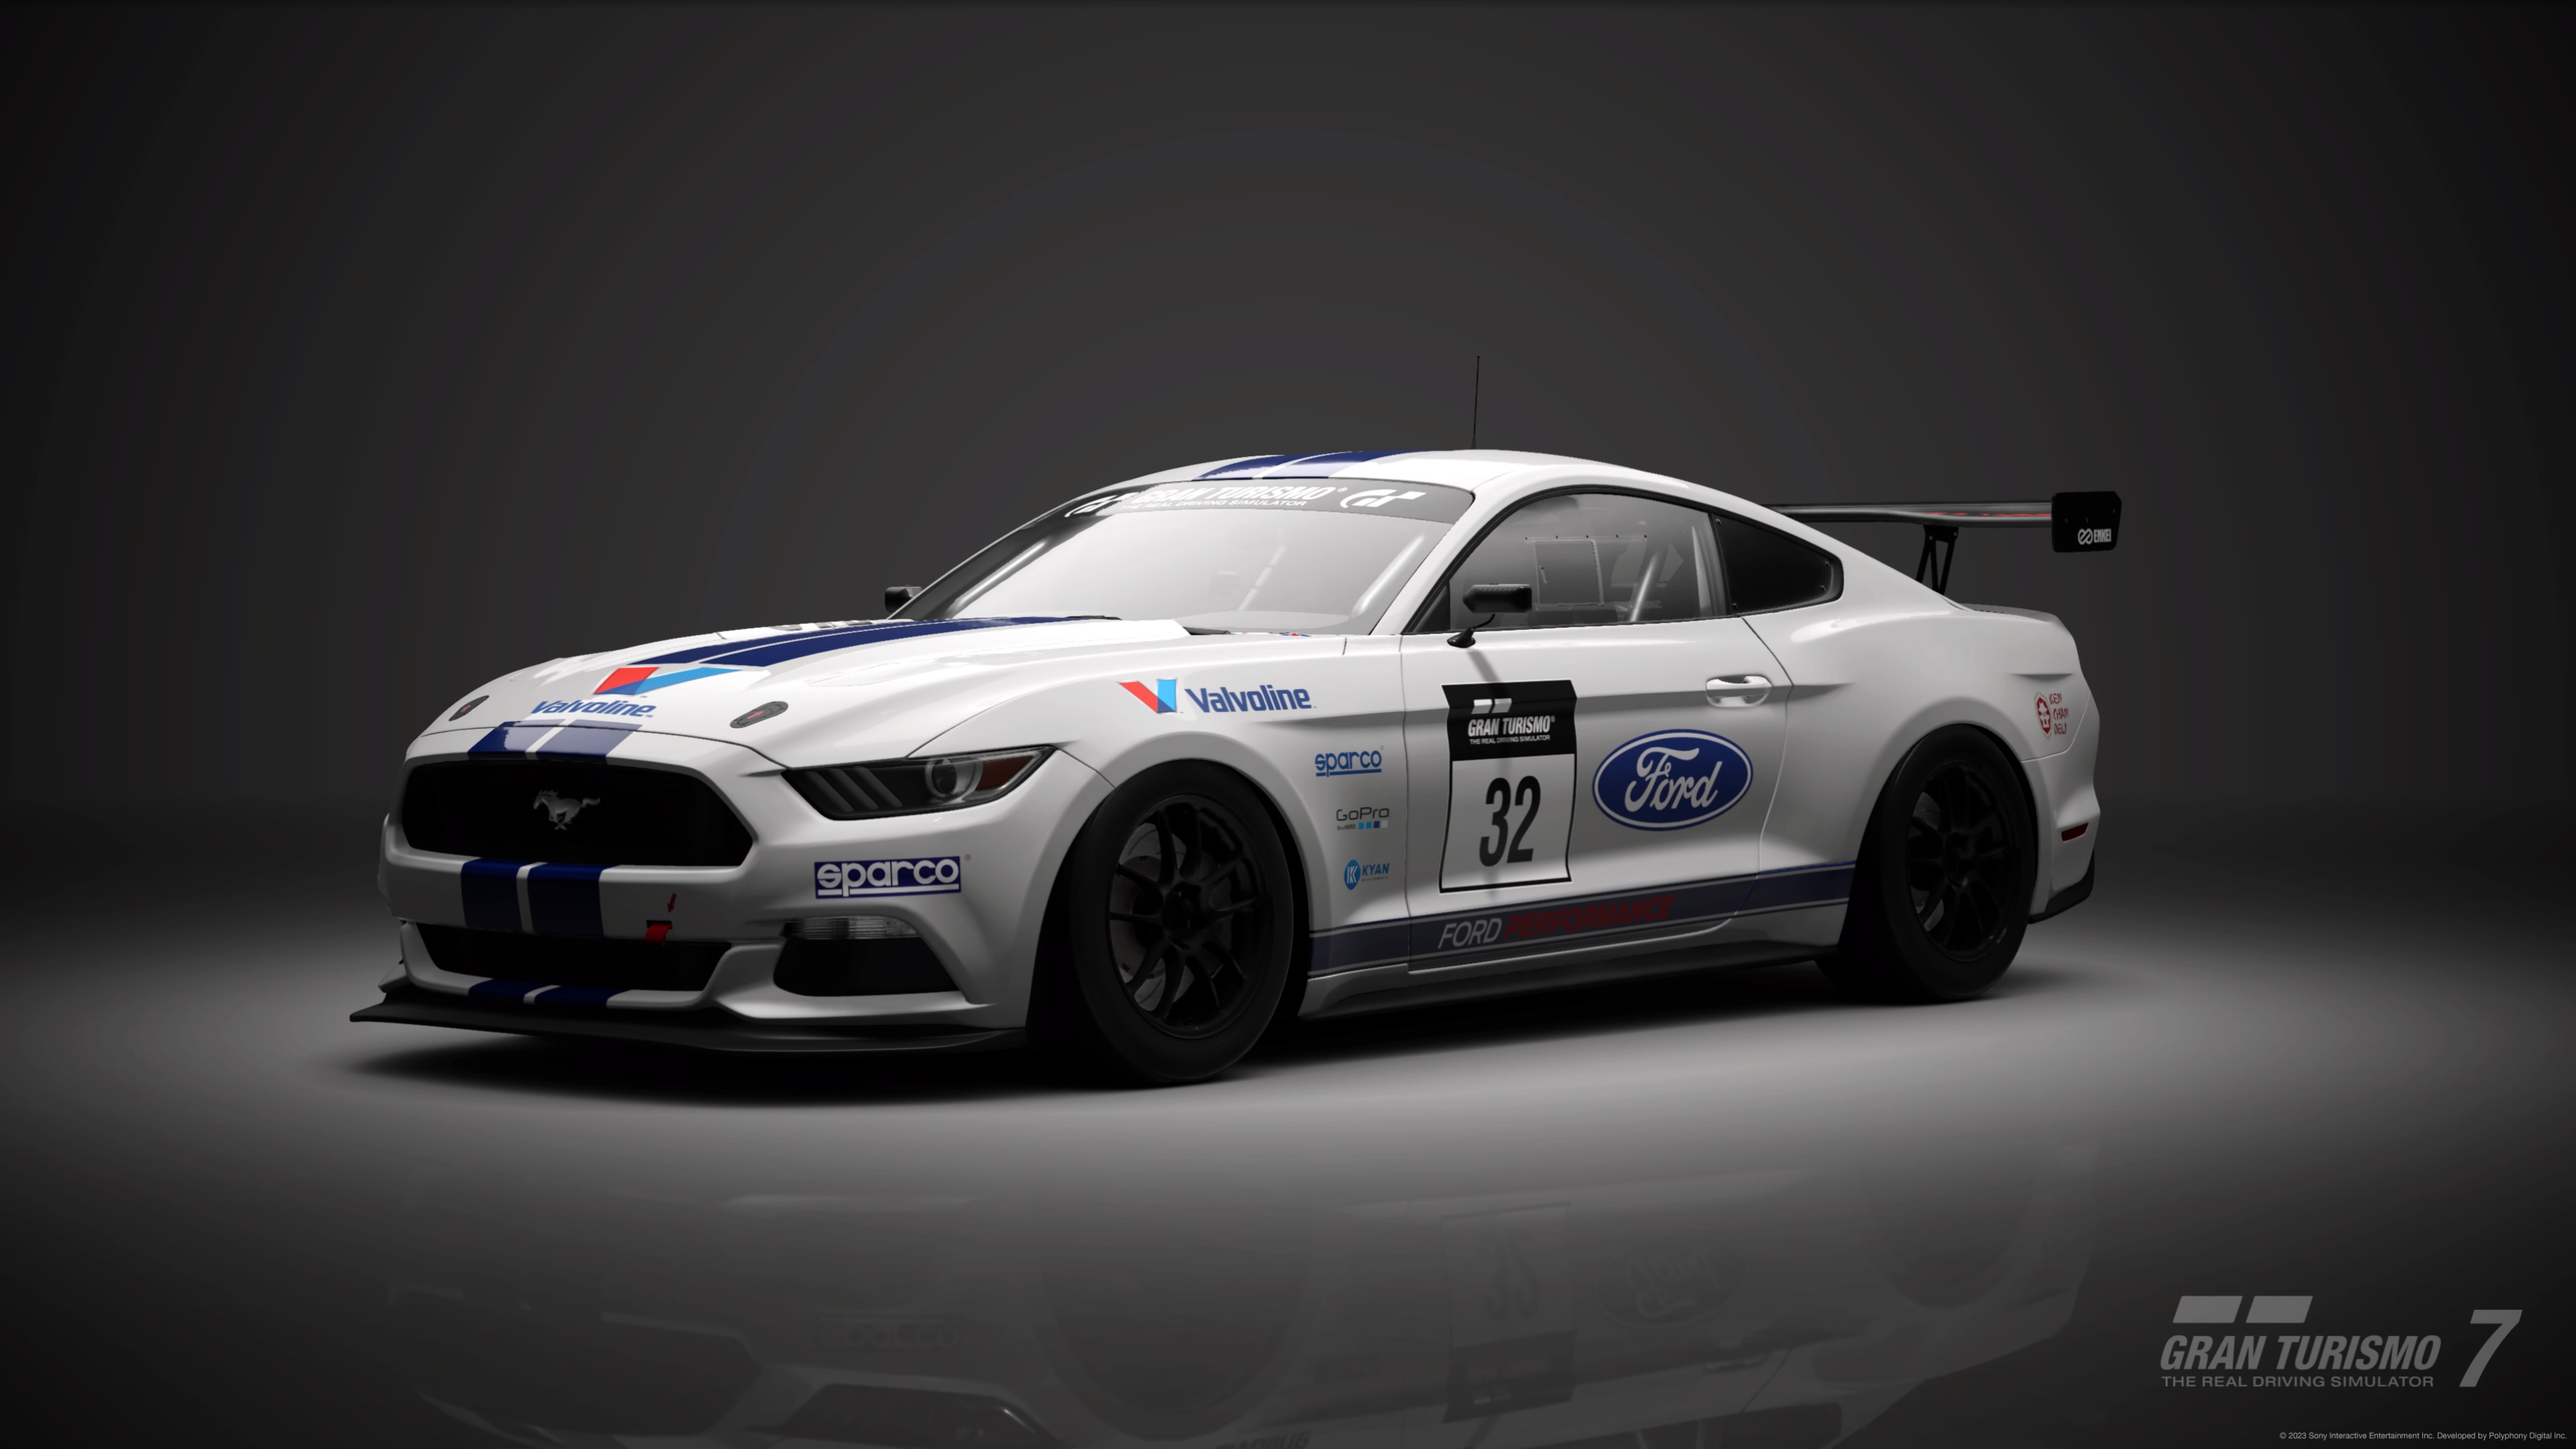 Gran Turismo 7 Car Collection by WitchWandaMaximoff on DeviantArt